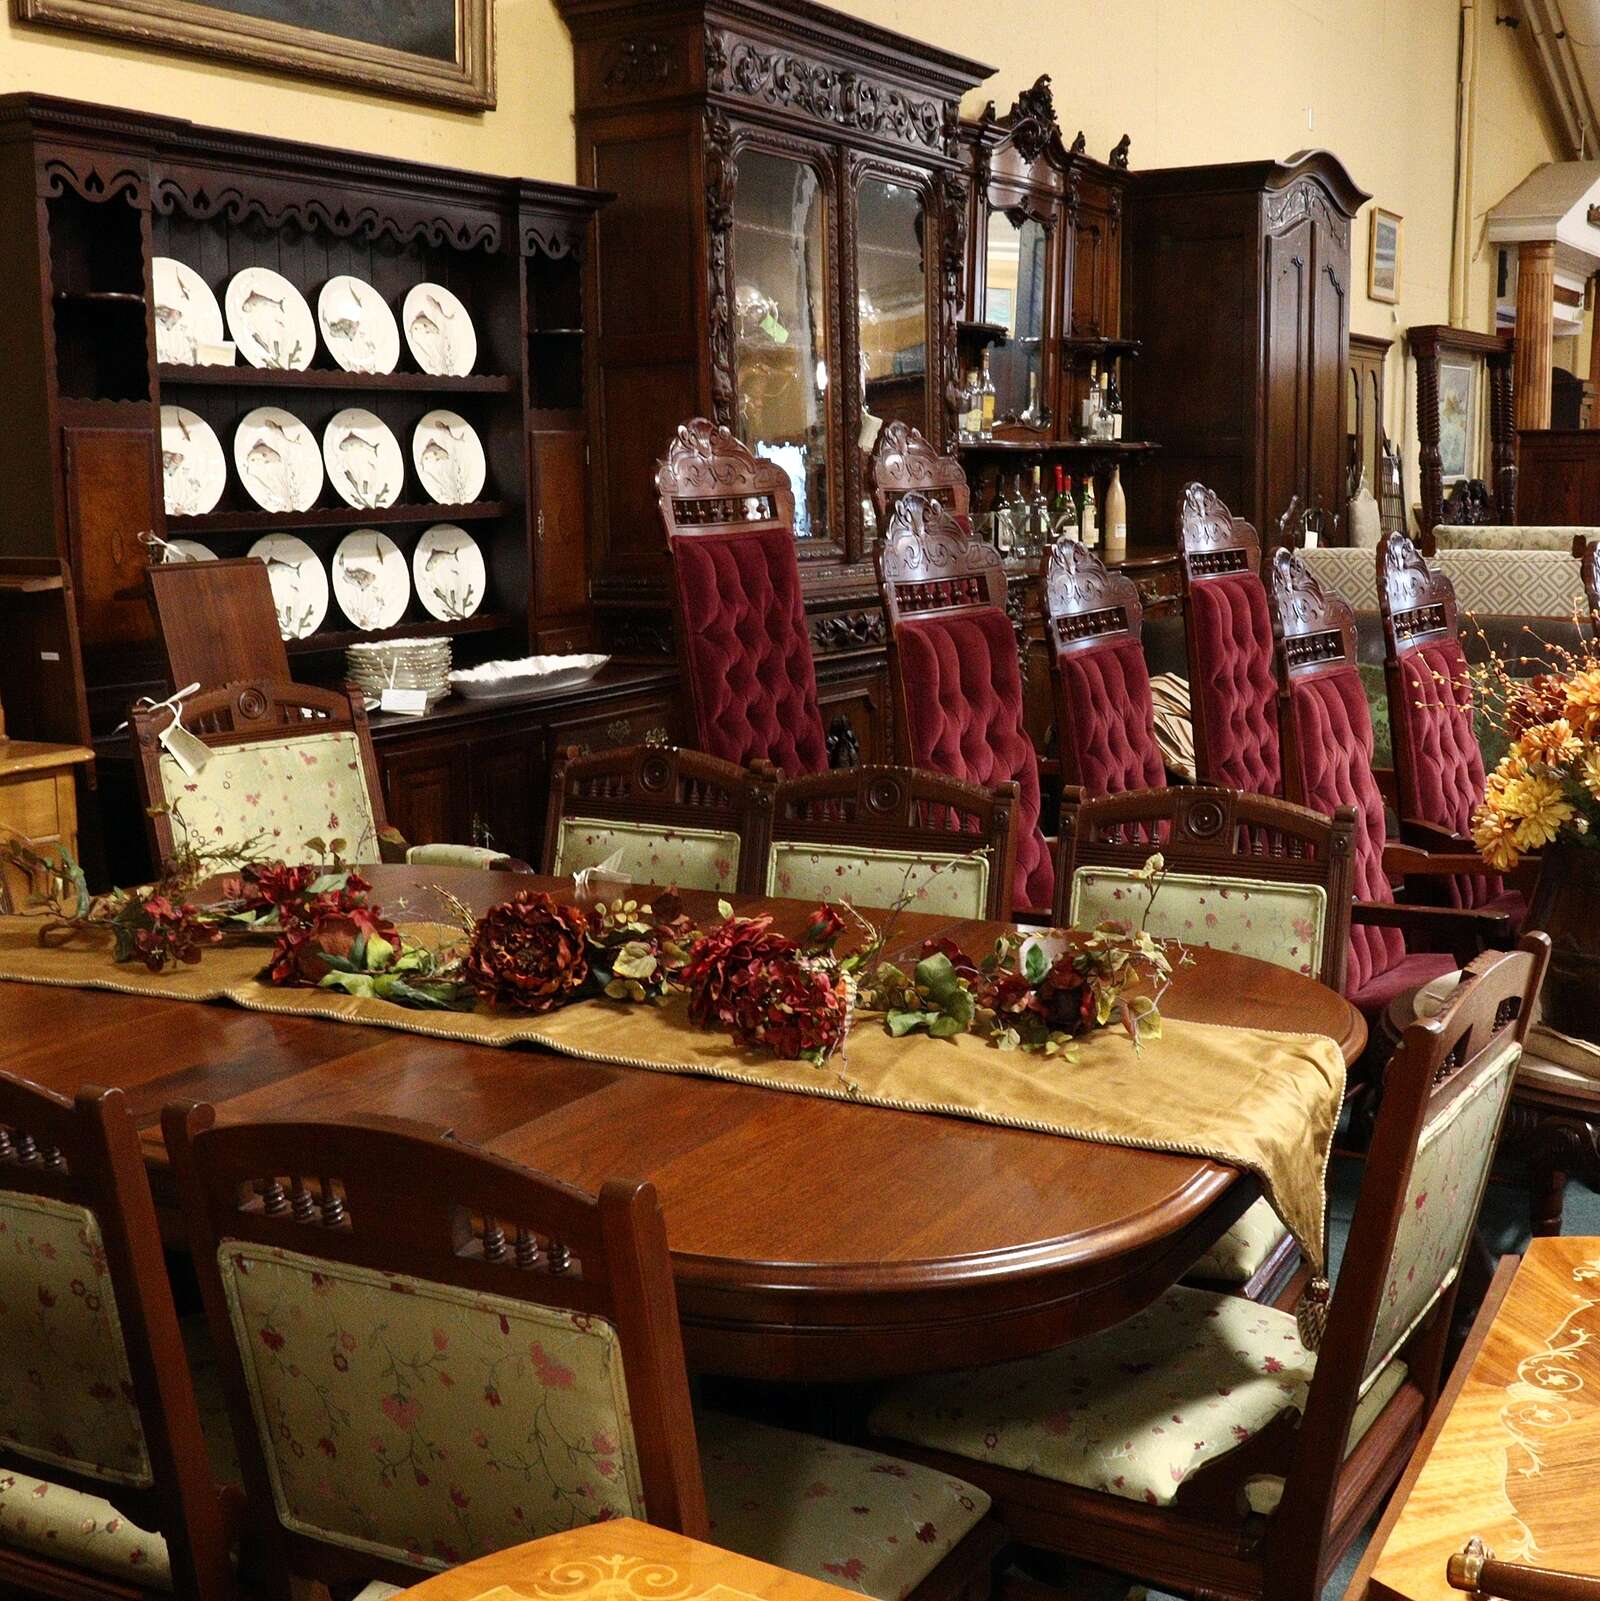 Everything you need to know about buying antique furniture